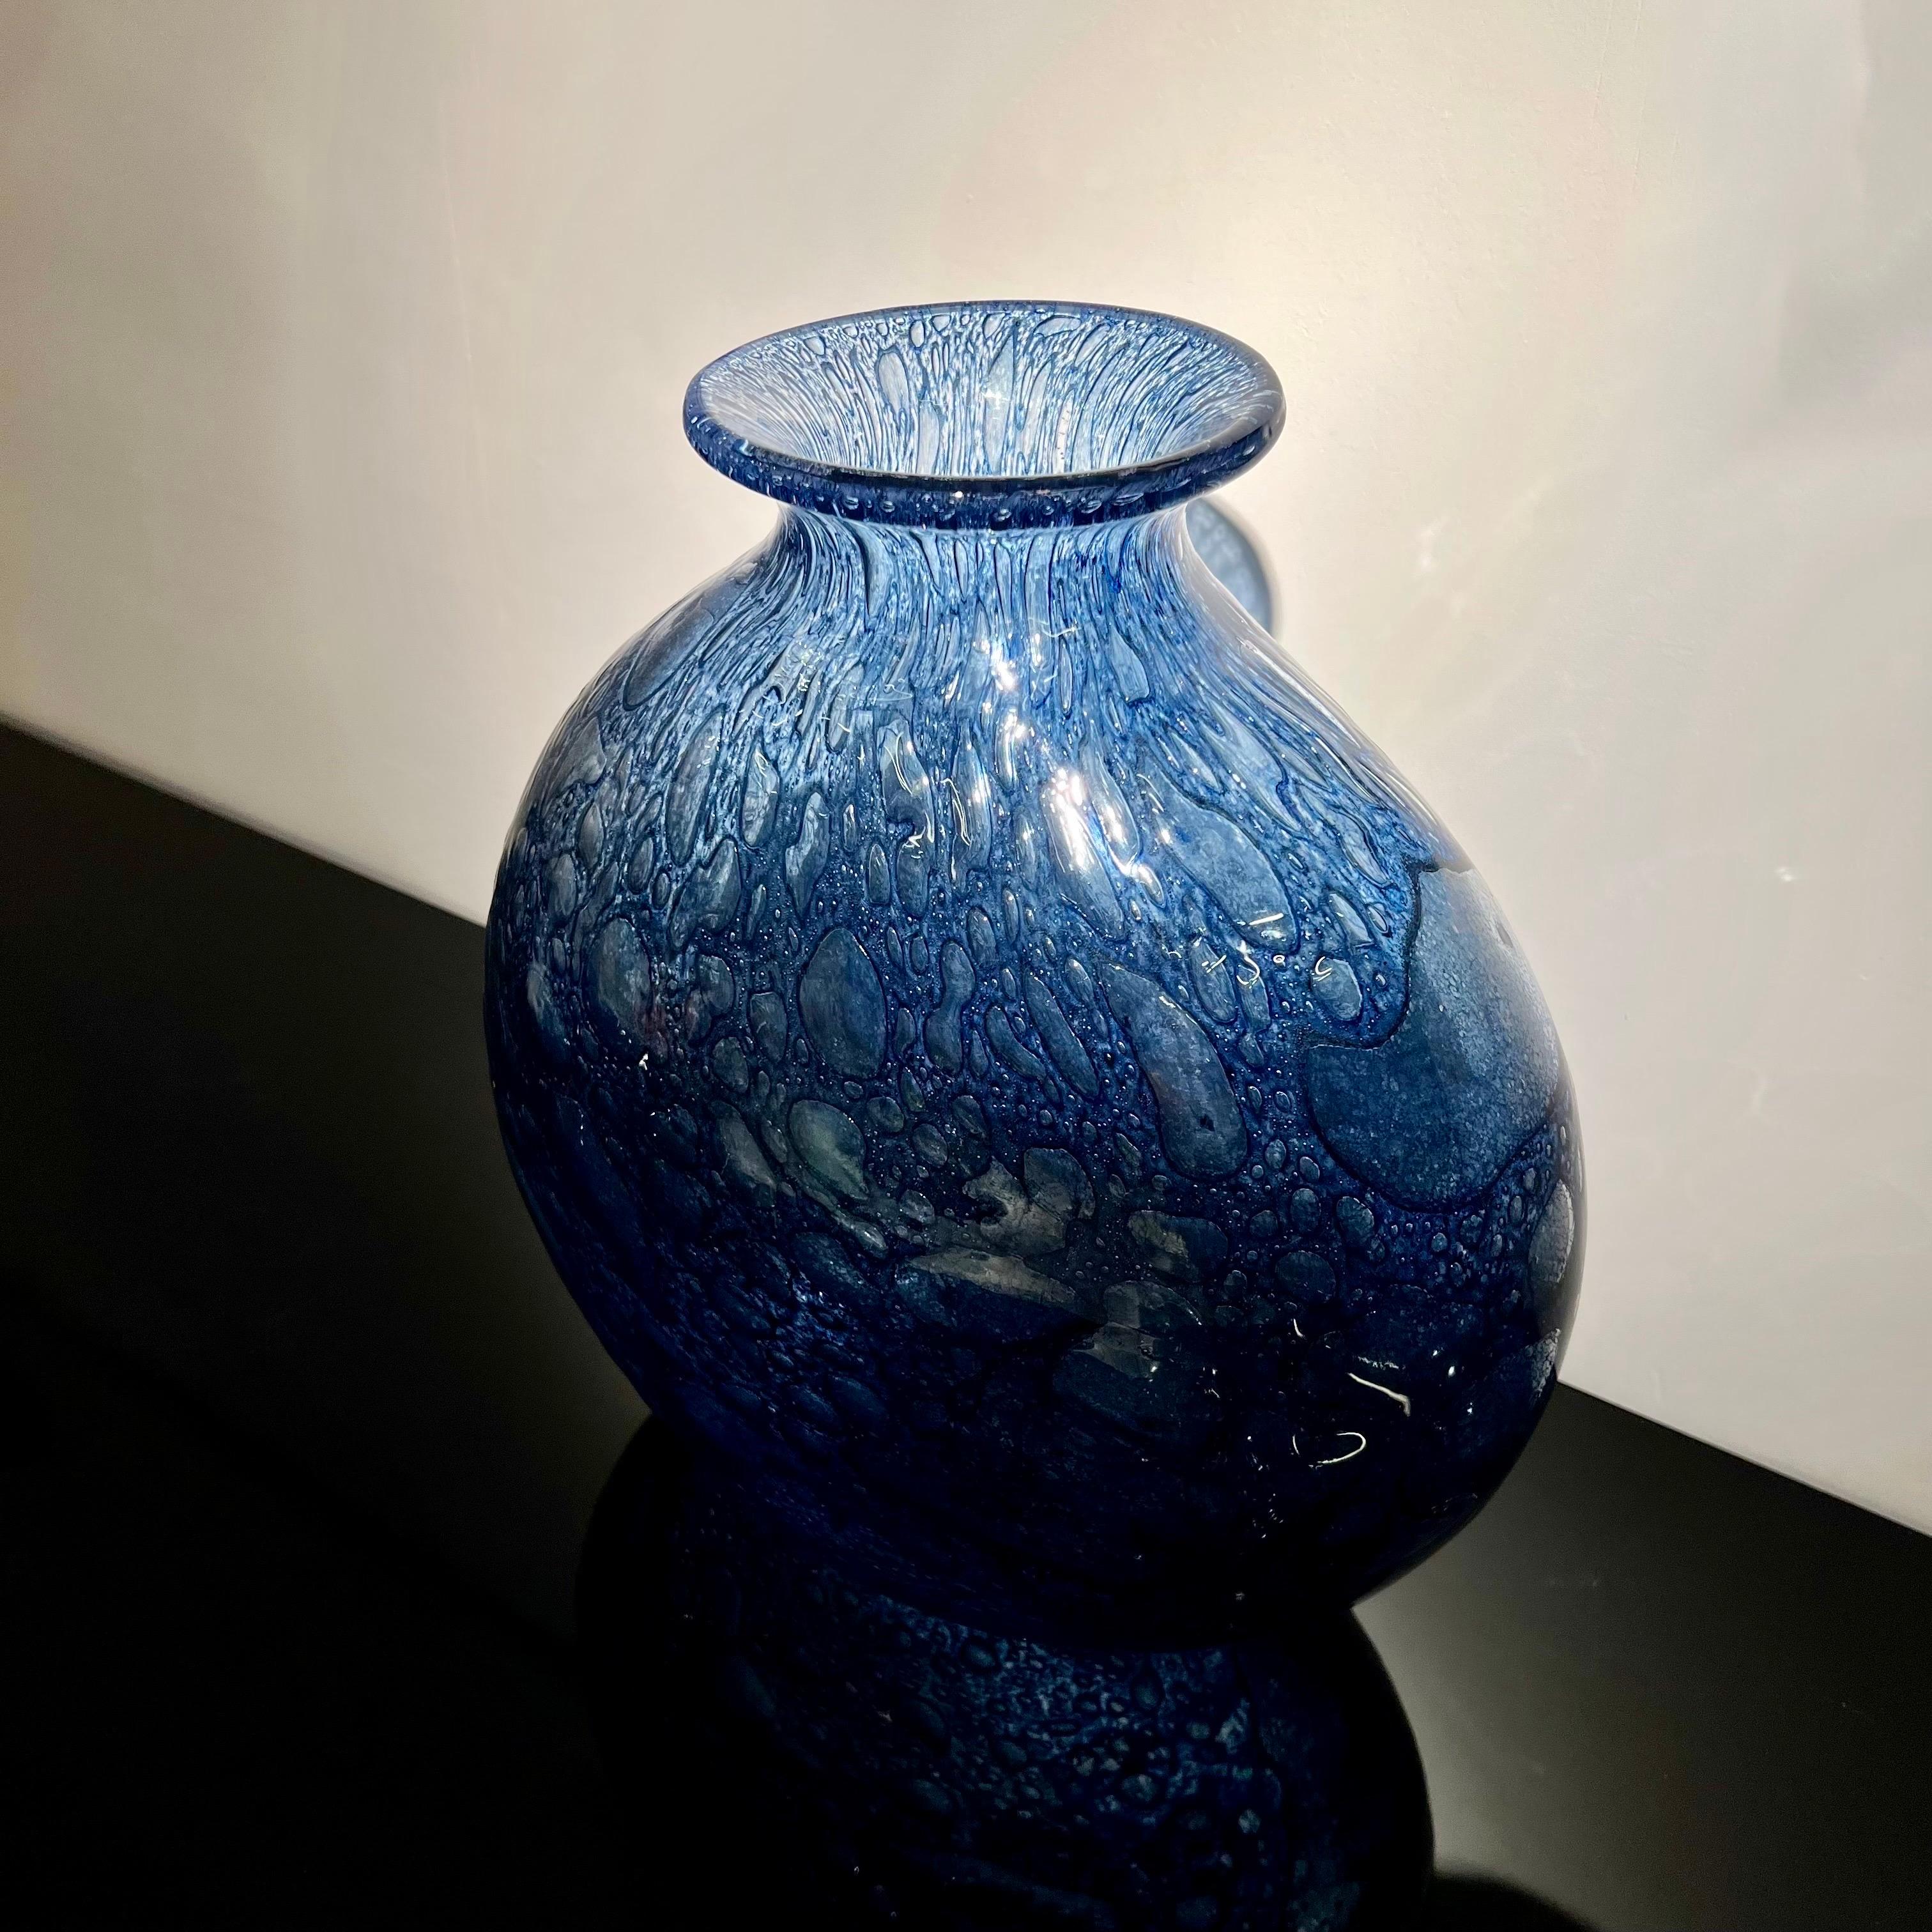 This superb blown-glass vase is the work of Italian artist Ercole Barovier.
In a magnificent deep blue, this object is extremely powerful decoratively, yet adaptable to a wide range of interior styles.

Ercole Barovier, 1889-1974, Italy
The Italian